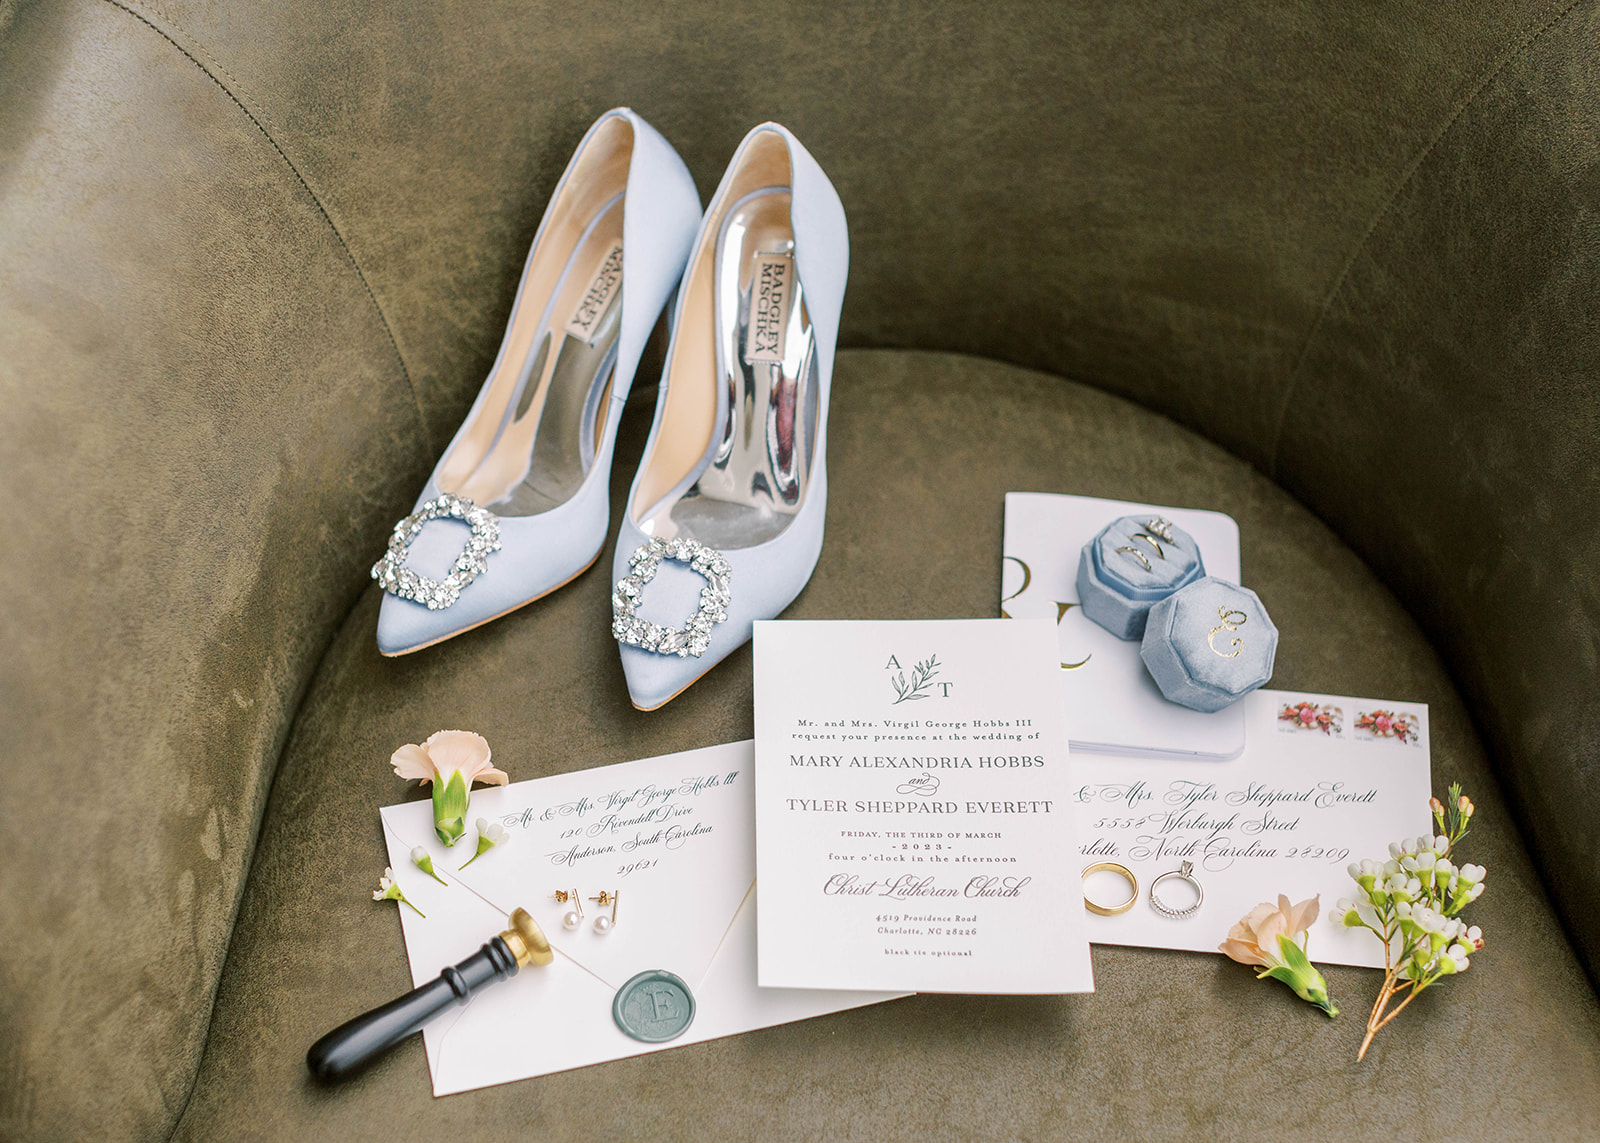 Bride + Groom wed in Charlotte at the Ruth Charlotte